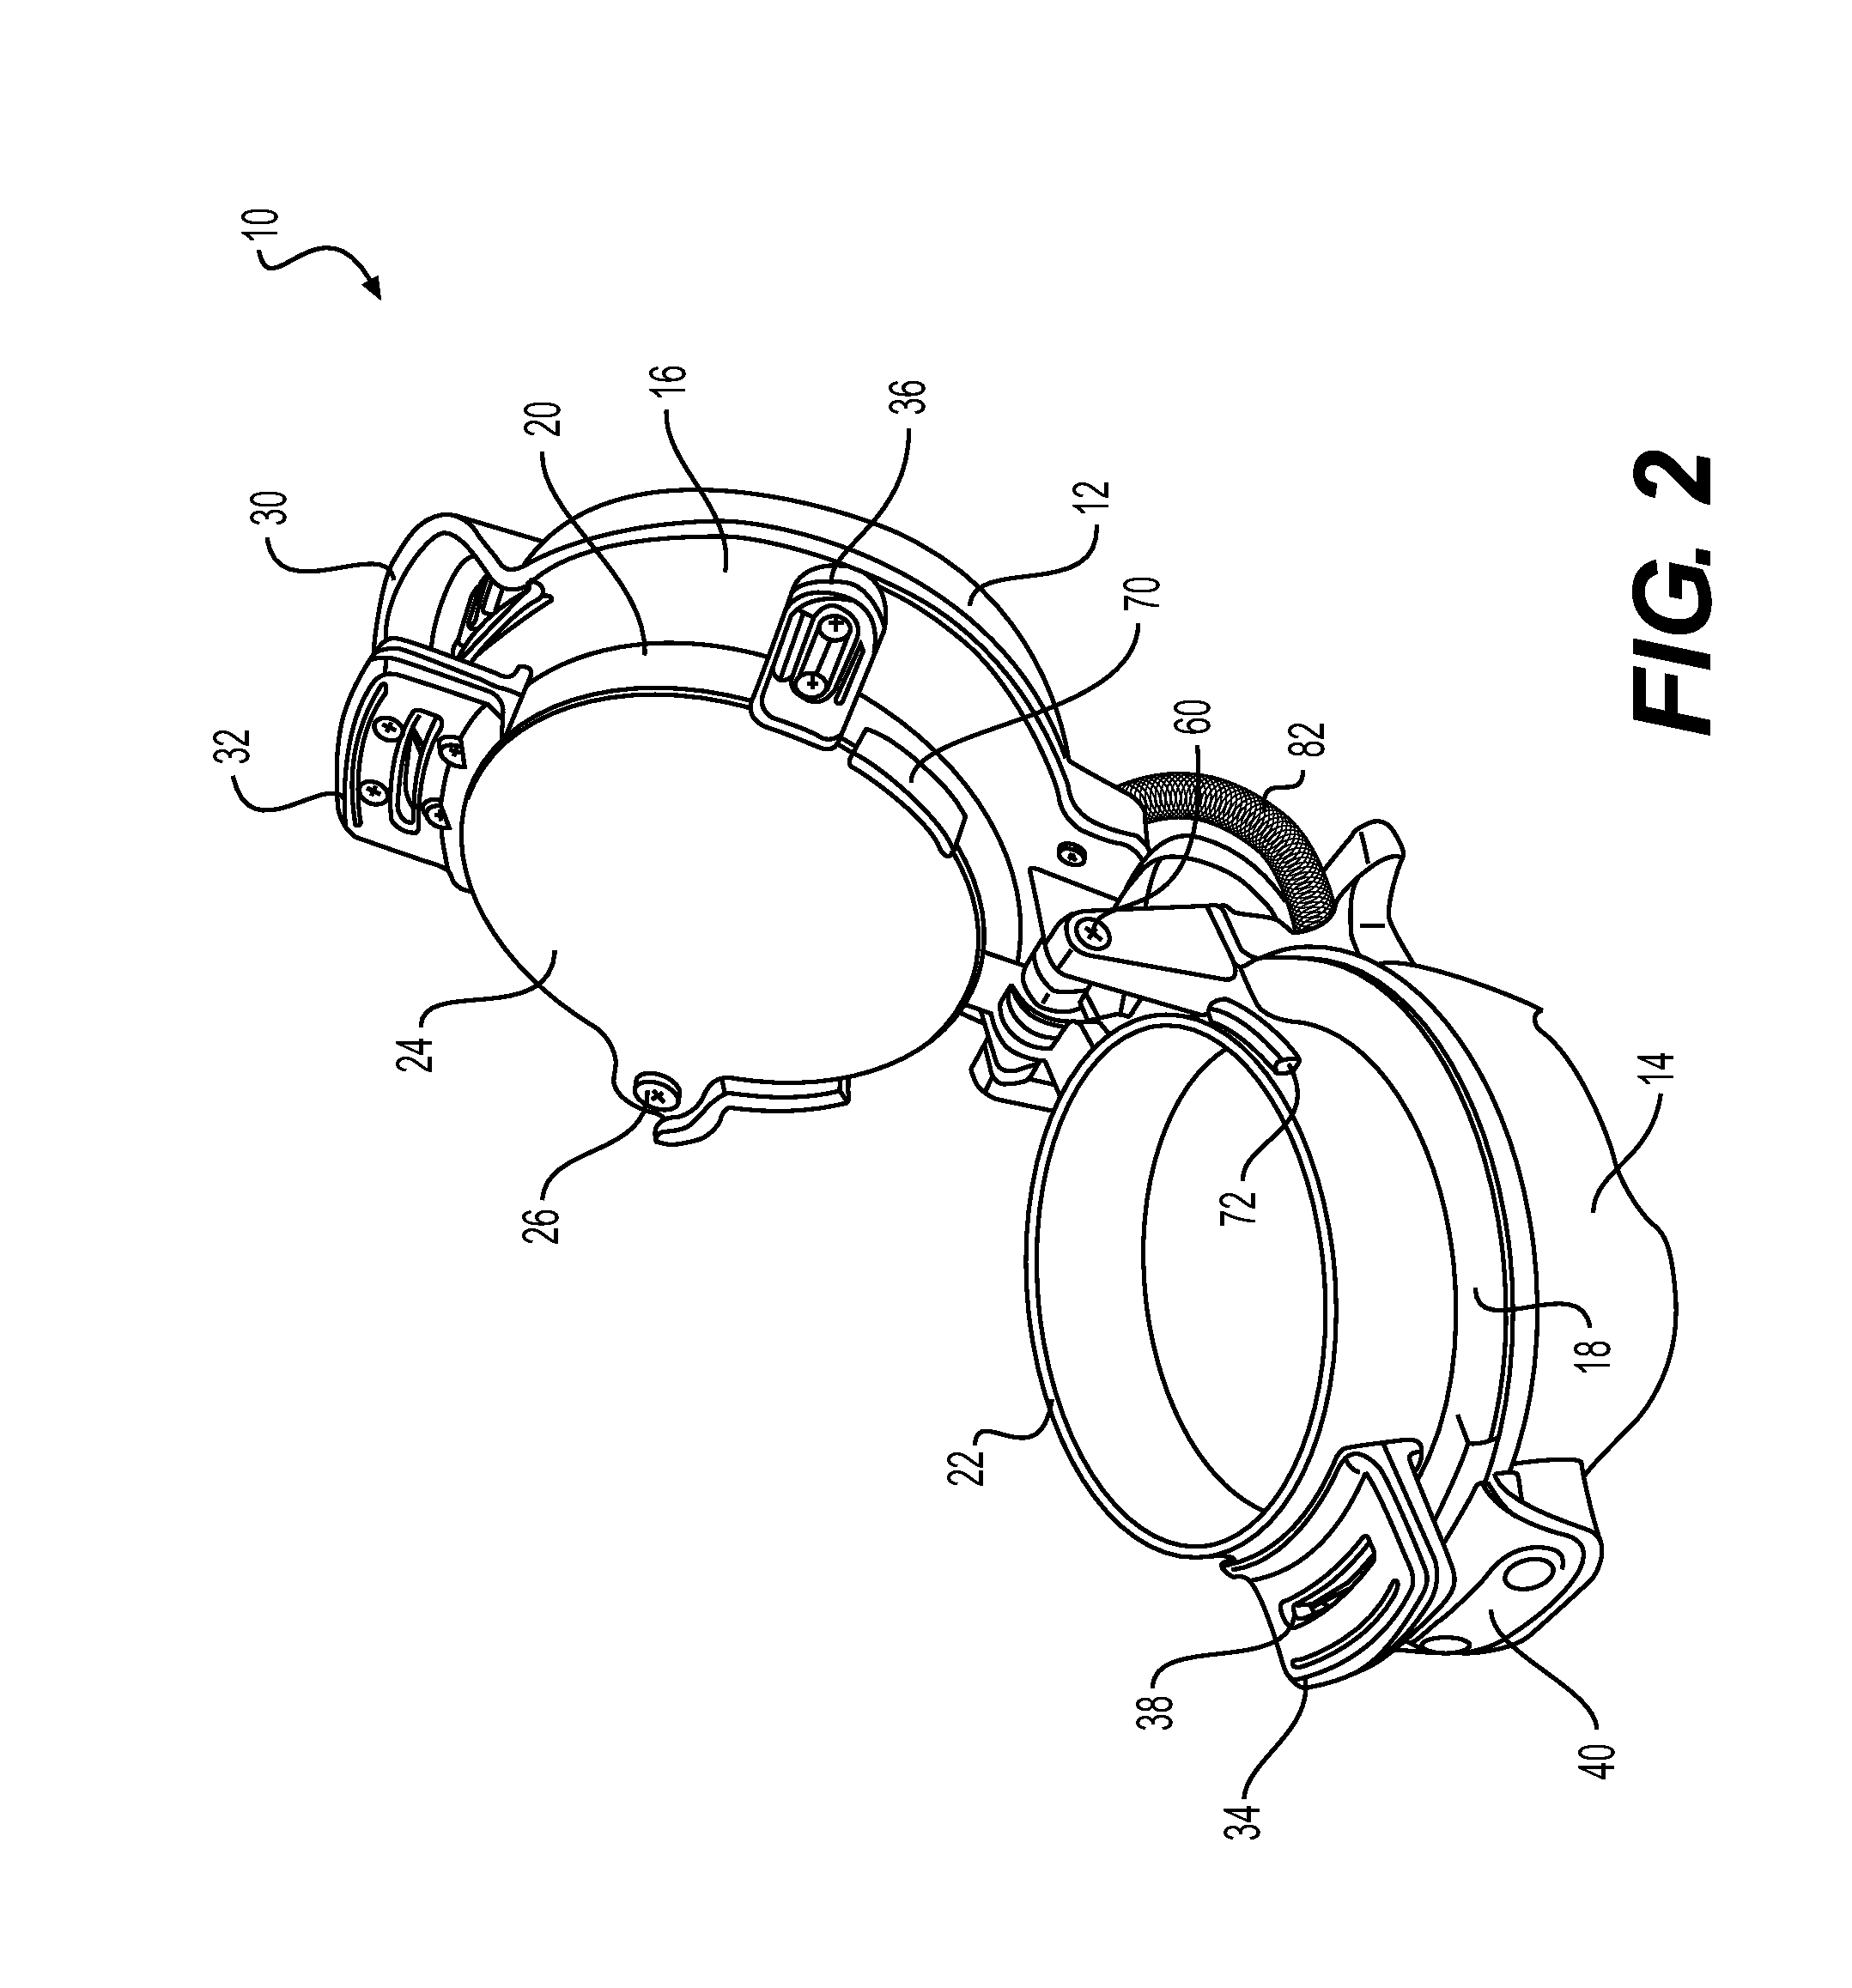 Sandwich Making Appliance and Method of Making a Sandwich with the Same